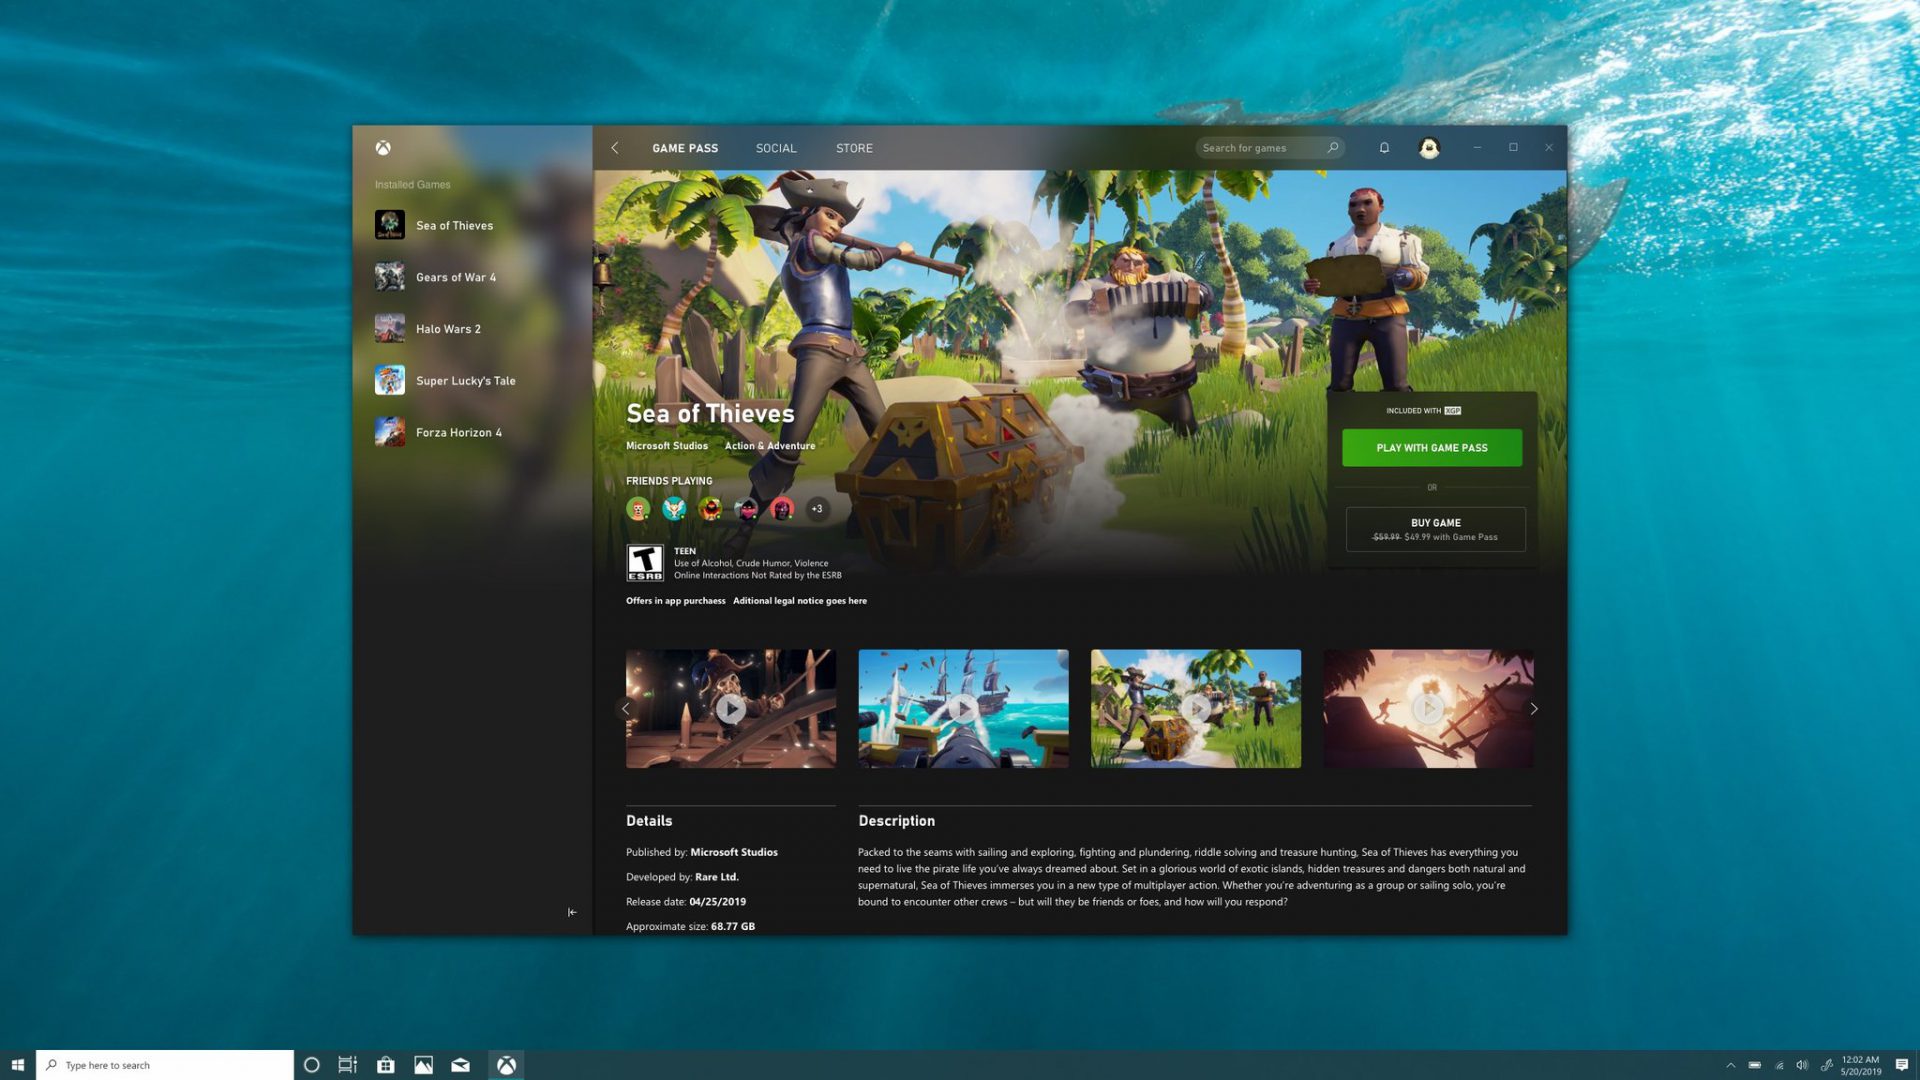 xbox game pass app download